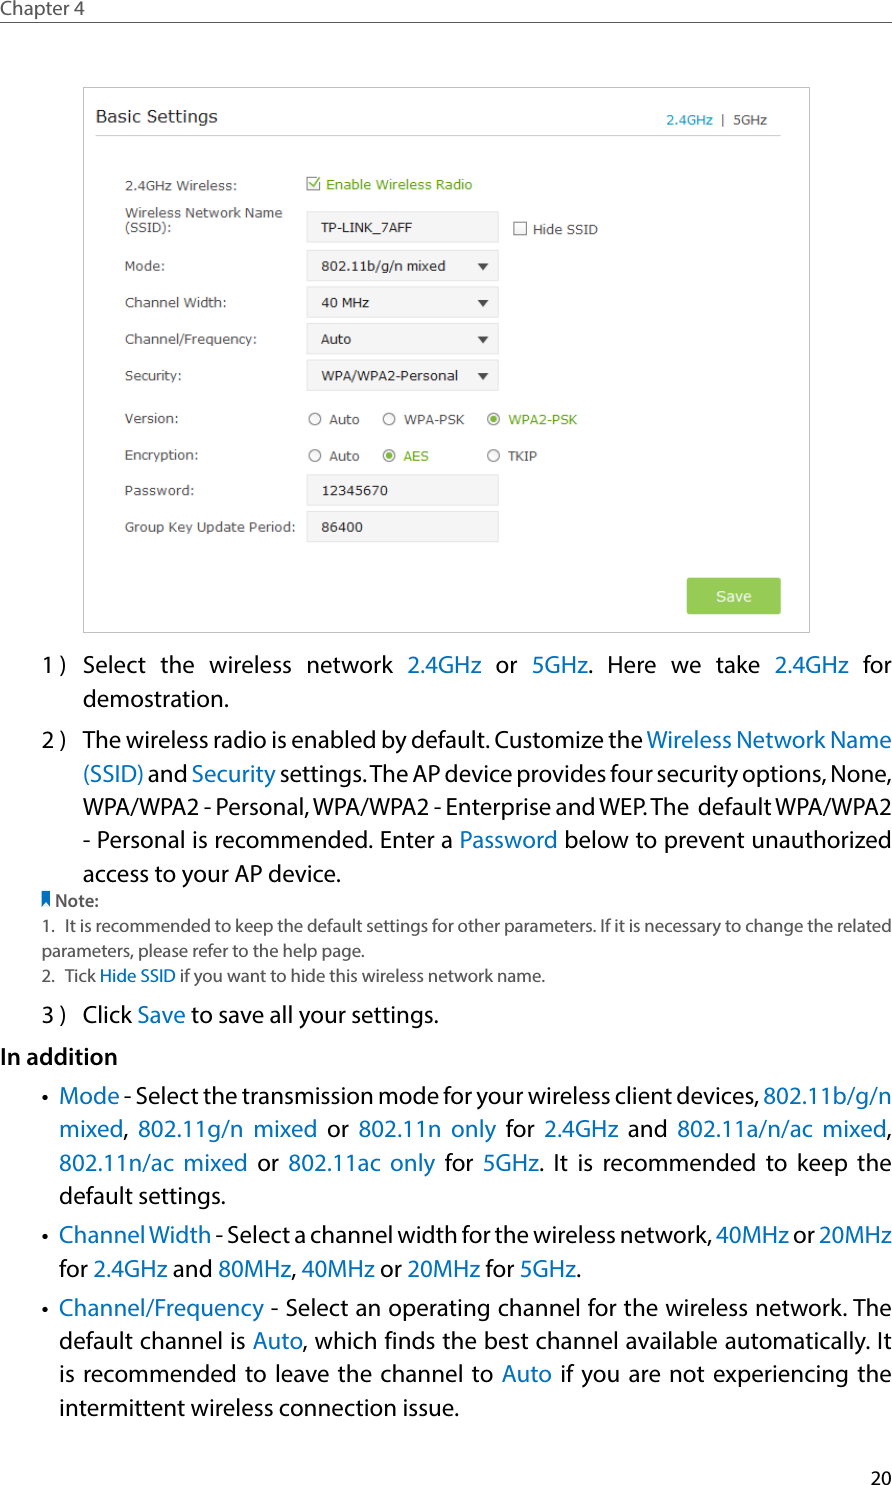 20Chapter 4  1 )  Select the wireless network 2.4GHz or 5GHz. Here we take 2.4GHz for demostration.2 )  The wireless radio is enabled by default. Customize the Wireless Network Name (SSID) and Security settings. The AP device provides four security options, None, WPA/WPA2 - Personal, WPA/WPA2 - Enterprise and WEP. The  default WPA/WPA2 - Personal is recommended. Enter a Password below to prevent unauthorized access to your AP device.Note:1.  It is recommended to keep the default settings for other parameters. If it is necessary to change the related parameters, please refer to the help page.2.  Tick Hide SSID if you want to hide this wireless network name.3 )  Click Save to save all your settings.In addition•  Mode - Select the transmission mode for your wireless client devices, 802.11b/g/n mixed,  802.11g/n mixed or 802.11n only for 2.4GHz and 802.11a/n/ac mixed, 802.11n/ac mixed or 802.11ac only for 5GHz. It is recommended to keep the default settings.•  Channel Width - Select a channel width for the wireless network, 40MHz or 20MHz for 2.4GHz and 80MHz, 40MHz or 20MHz for 5GHz.•  Channel/Frequency - Select an operating channel for the wireless network. The default channel is Auto, which finds the best channel available automatically. It is recommended to leave the channel to Auto if you are not experiencing the intermittent wireless connection issue.